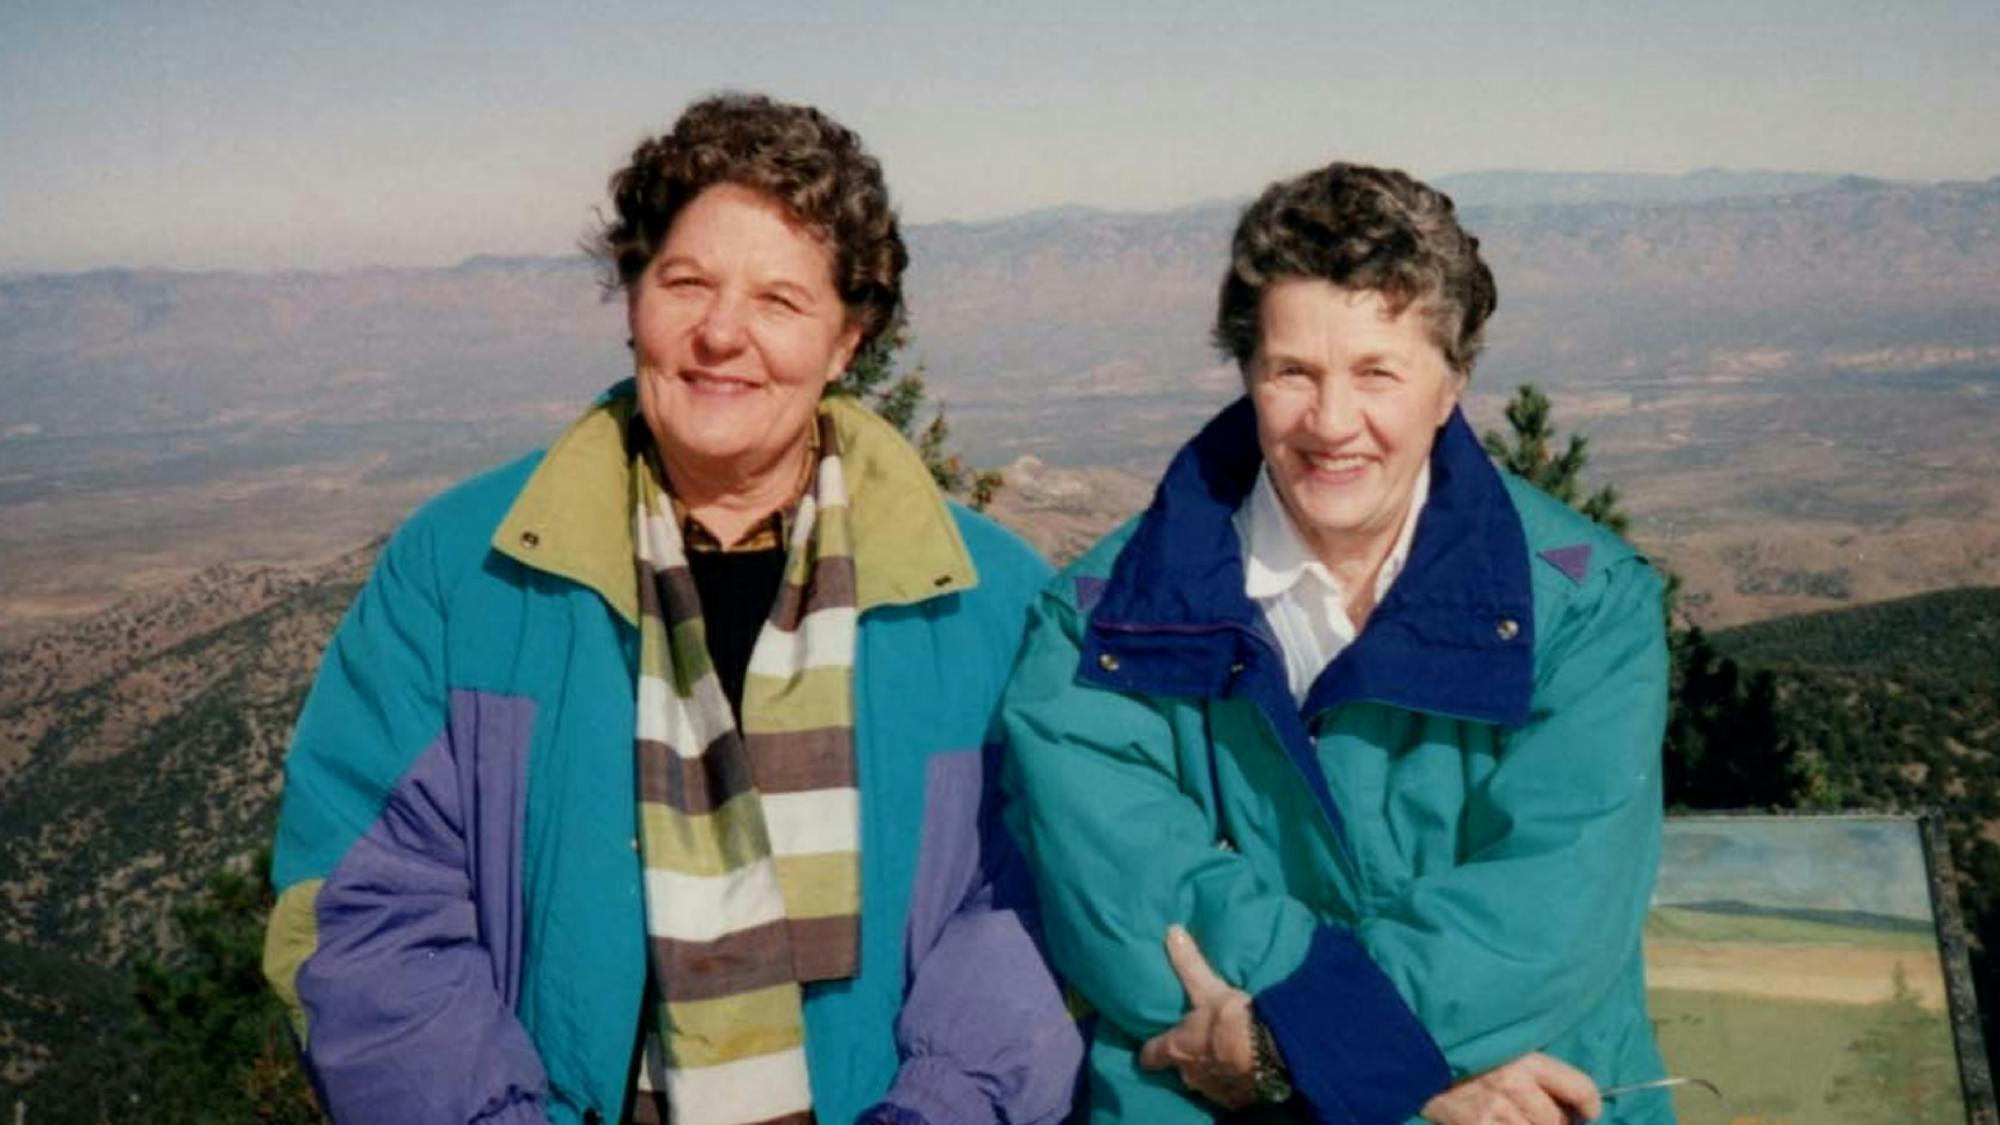 Henschel and Donahue pose smiling in front of scenic mountains in this faded photograph. The pair wear windbreakers in classic 80s colors.  